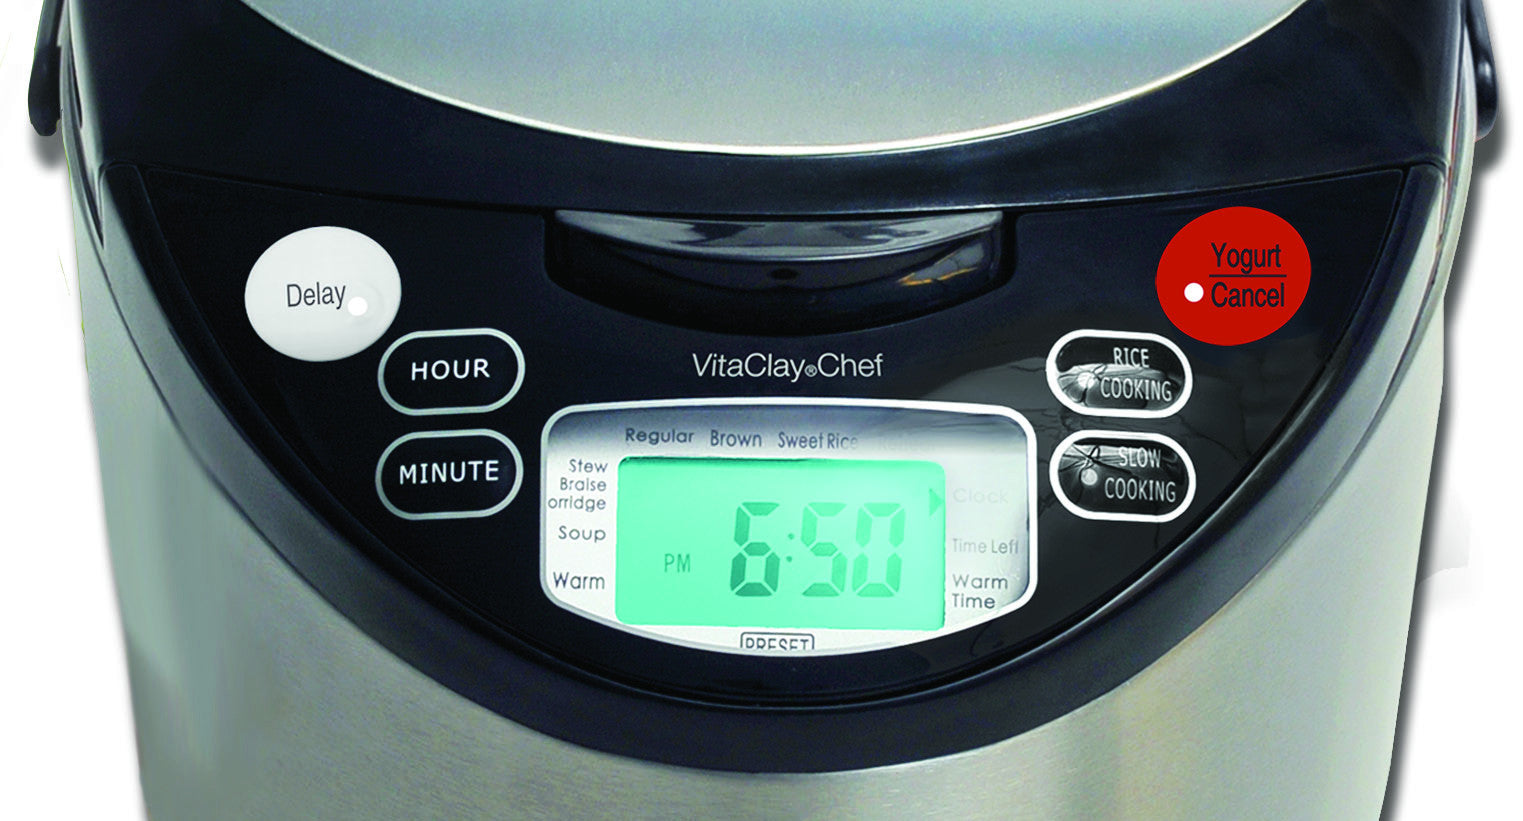 Setting the Delay Cooking Timer on the (Oval) VitaClay Multi-Cooker